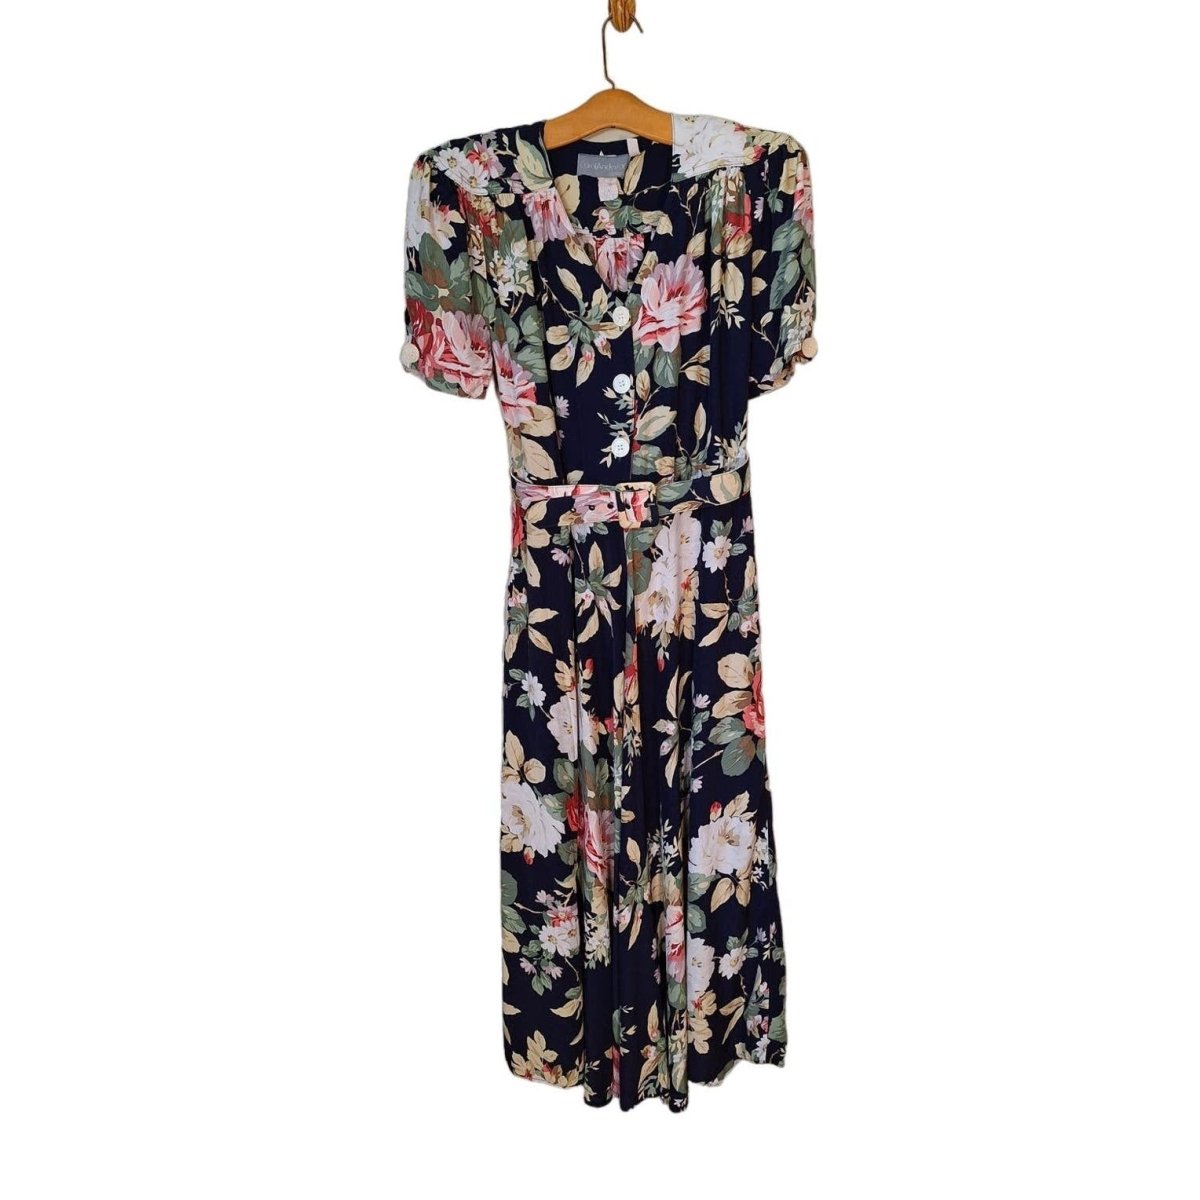 Vintage 80s does 40s Navy Floral Rayon Dress Women Size Medium - themallvintage The Mall Vintage